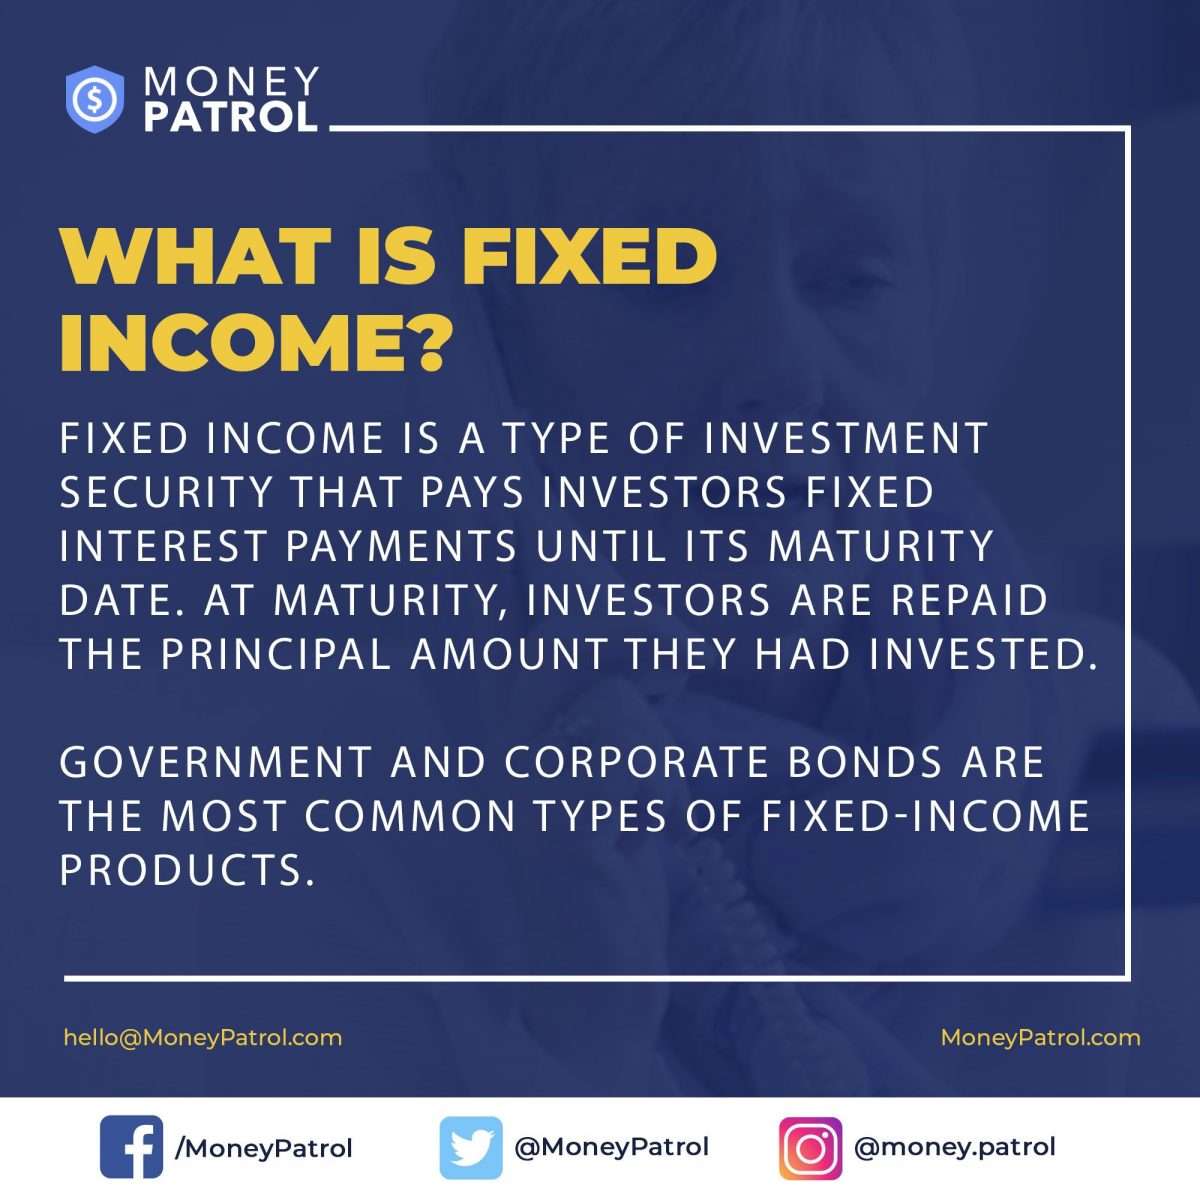 FIXED INCOME IS A TYPE OF INVESTMENT SECURITY THAT PAYS INVESTORS FIXED ...